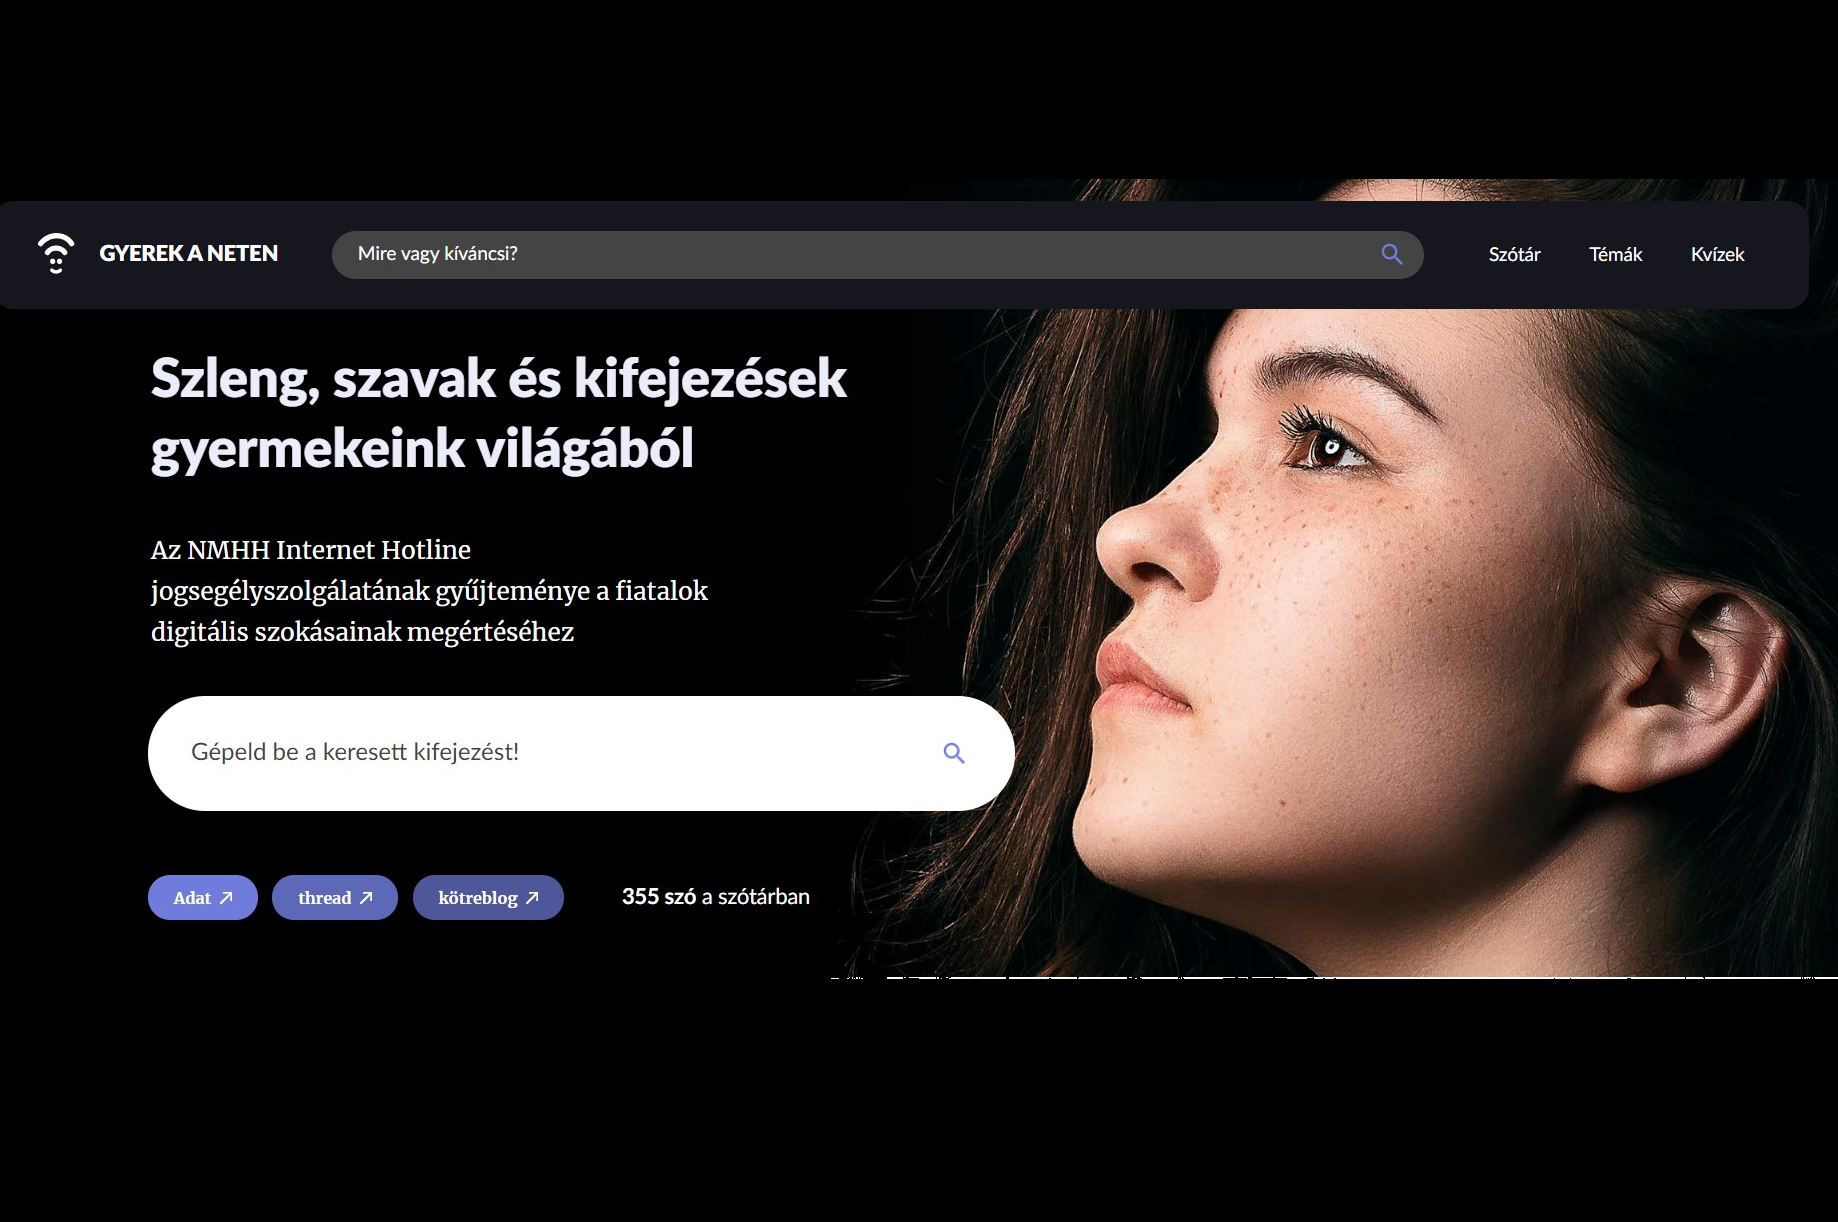 The new information website for parents in Hungary is live!